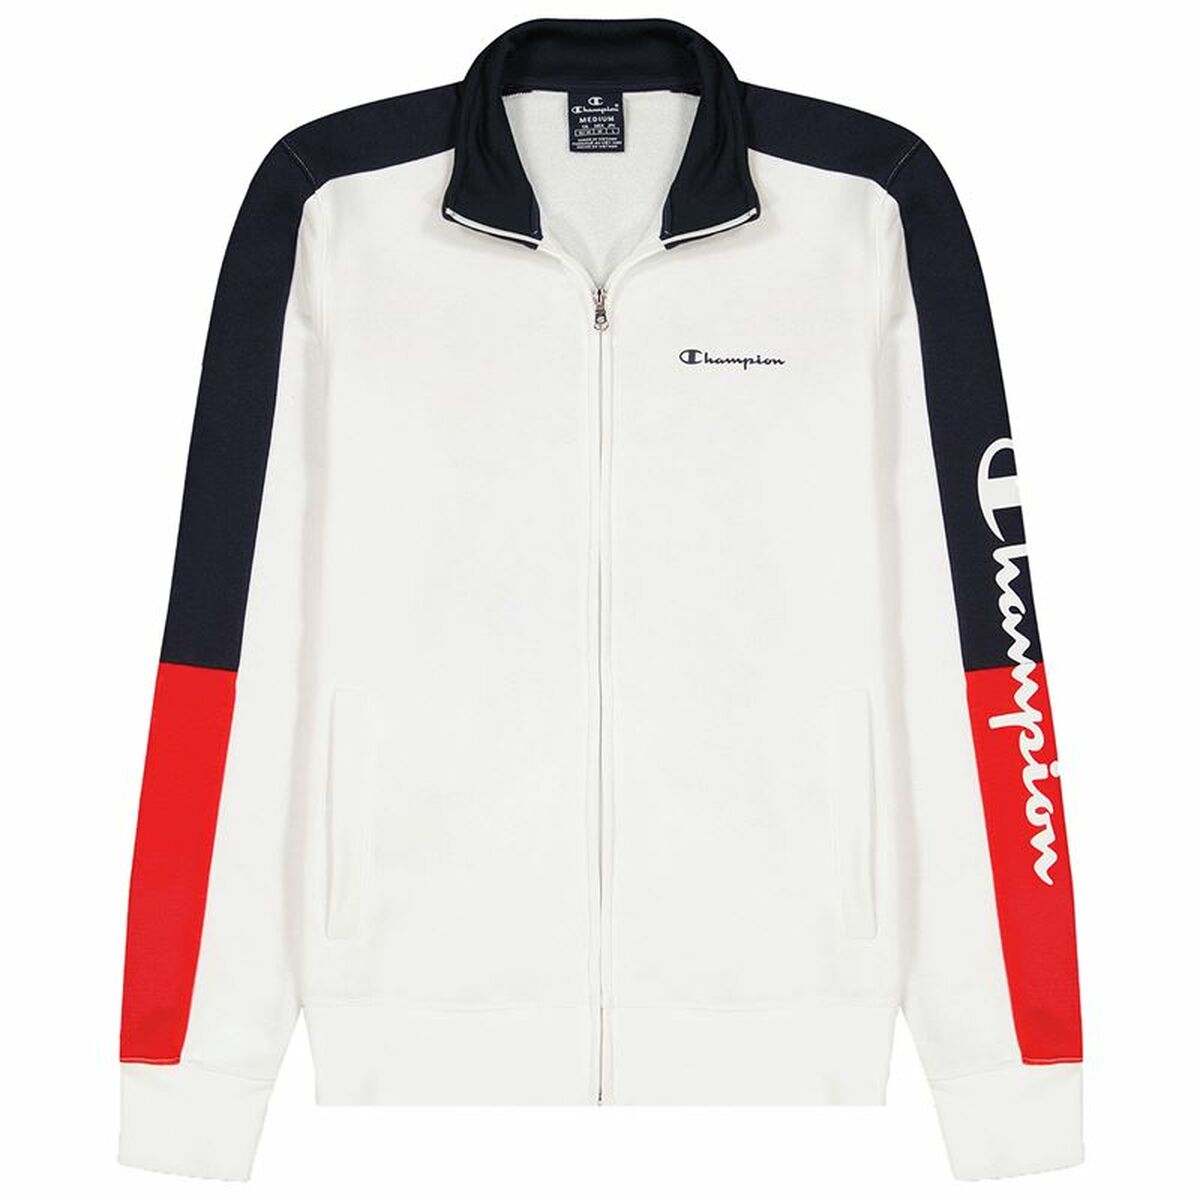 Adult's Sports Outfit Champion Full Zip Suit White Men